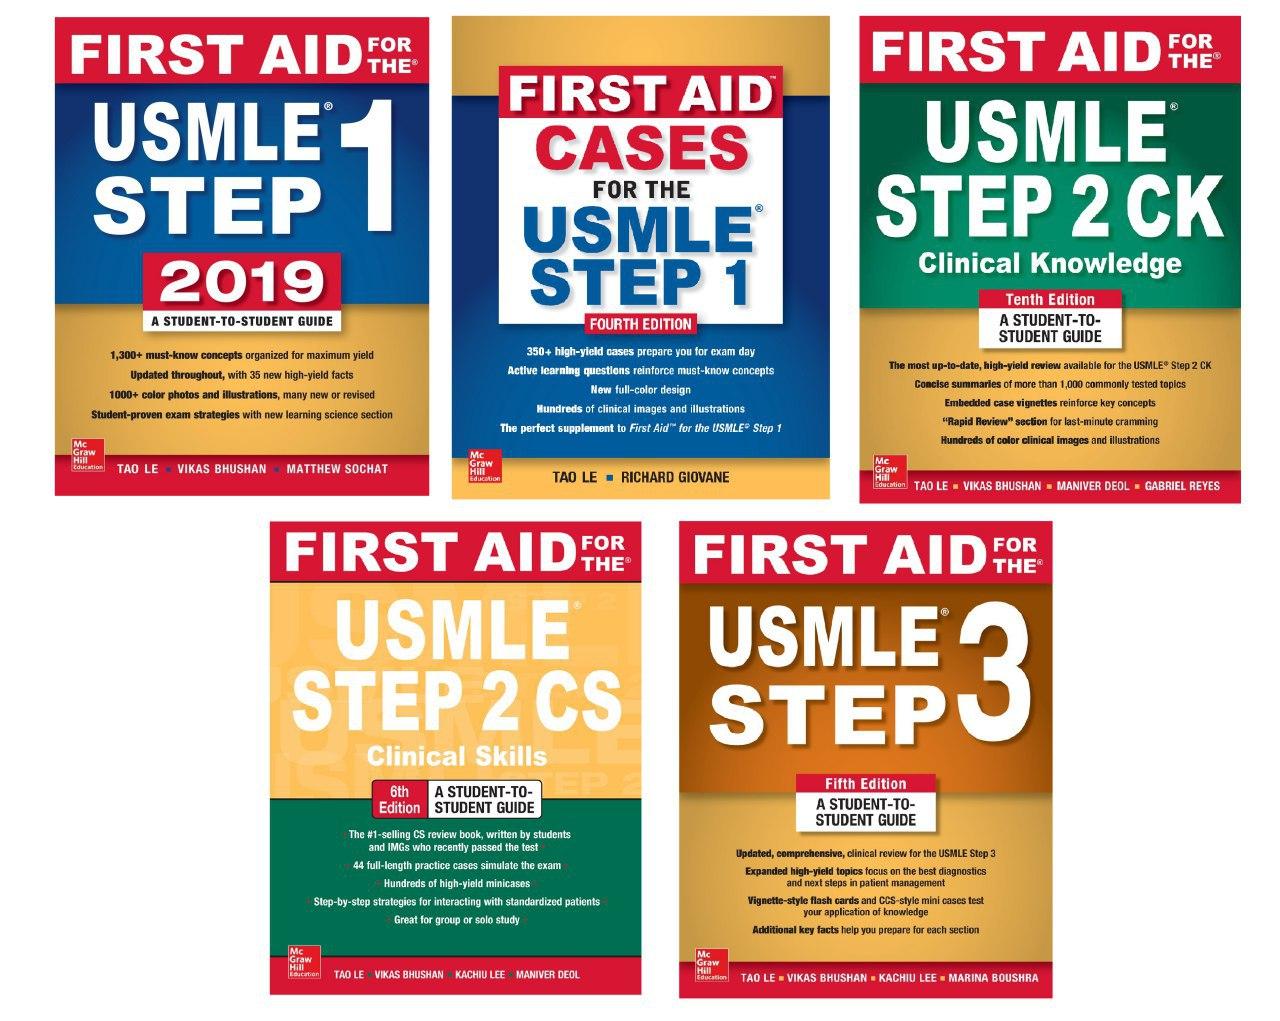 First Aid For USMLE Step 123 کتاب پزشکی بهار